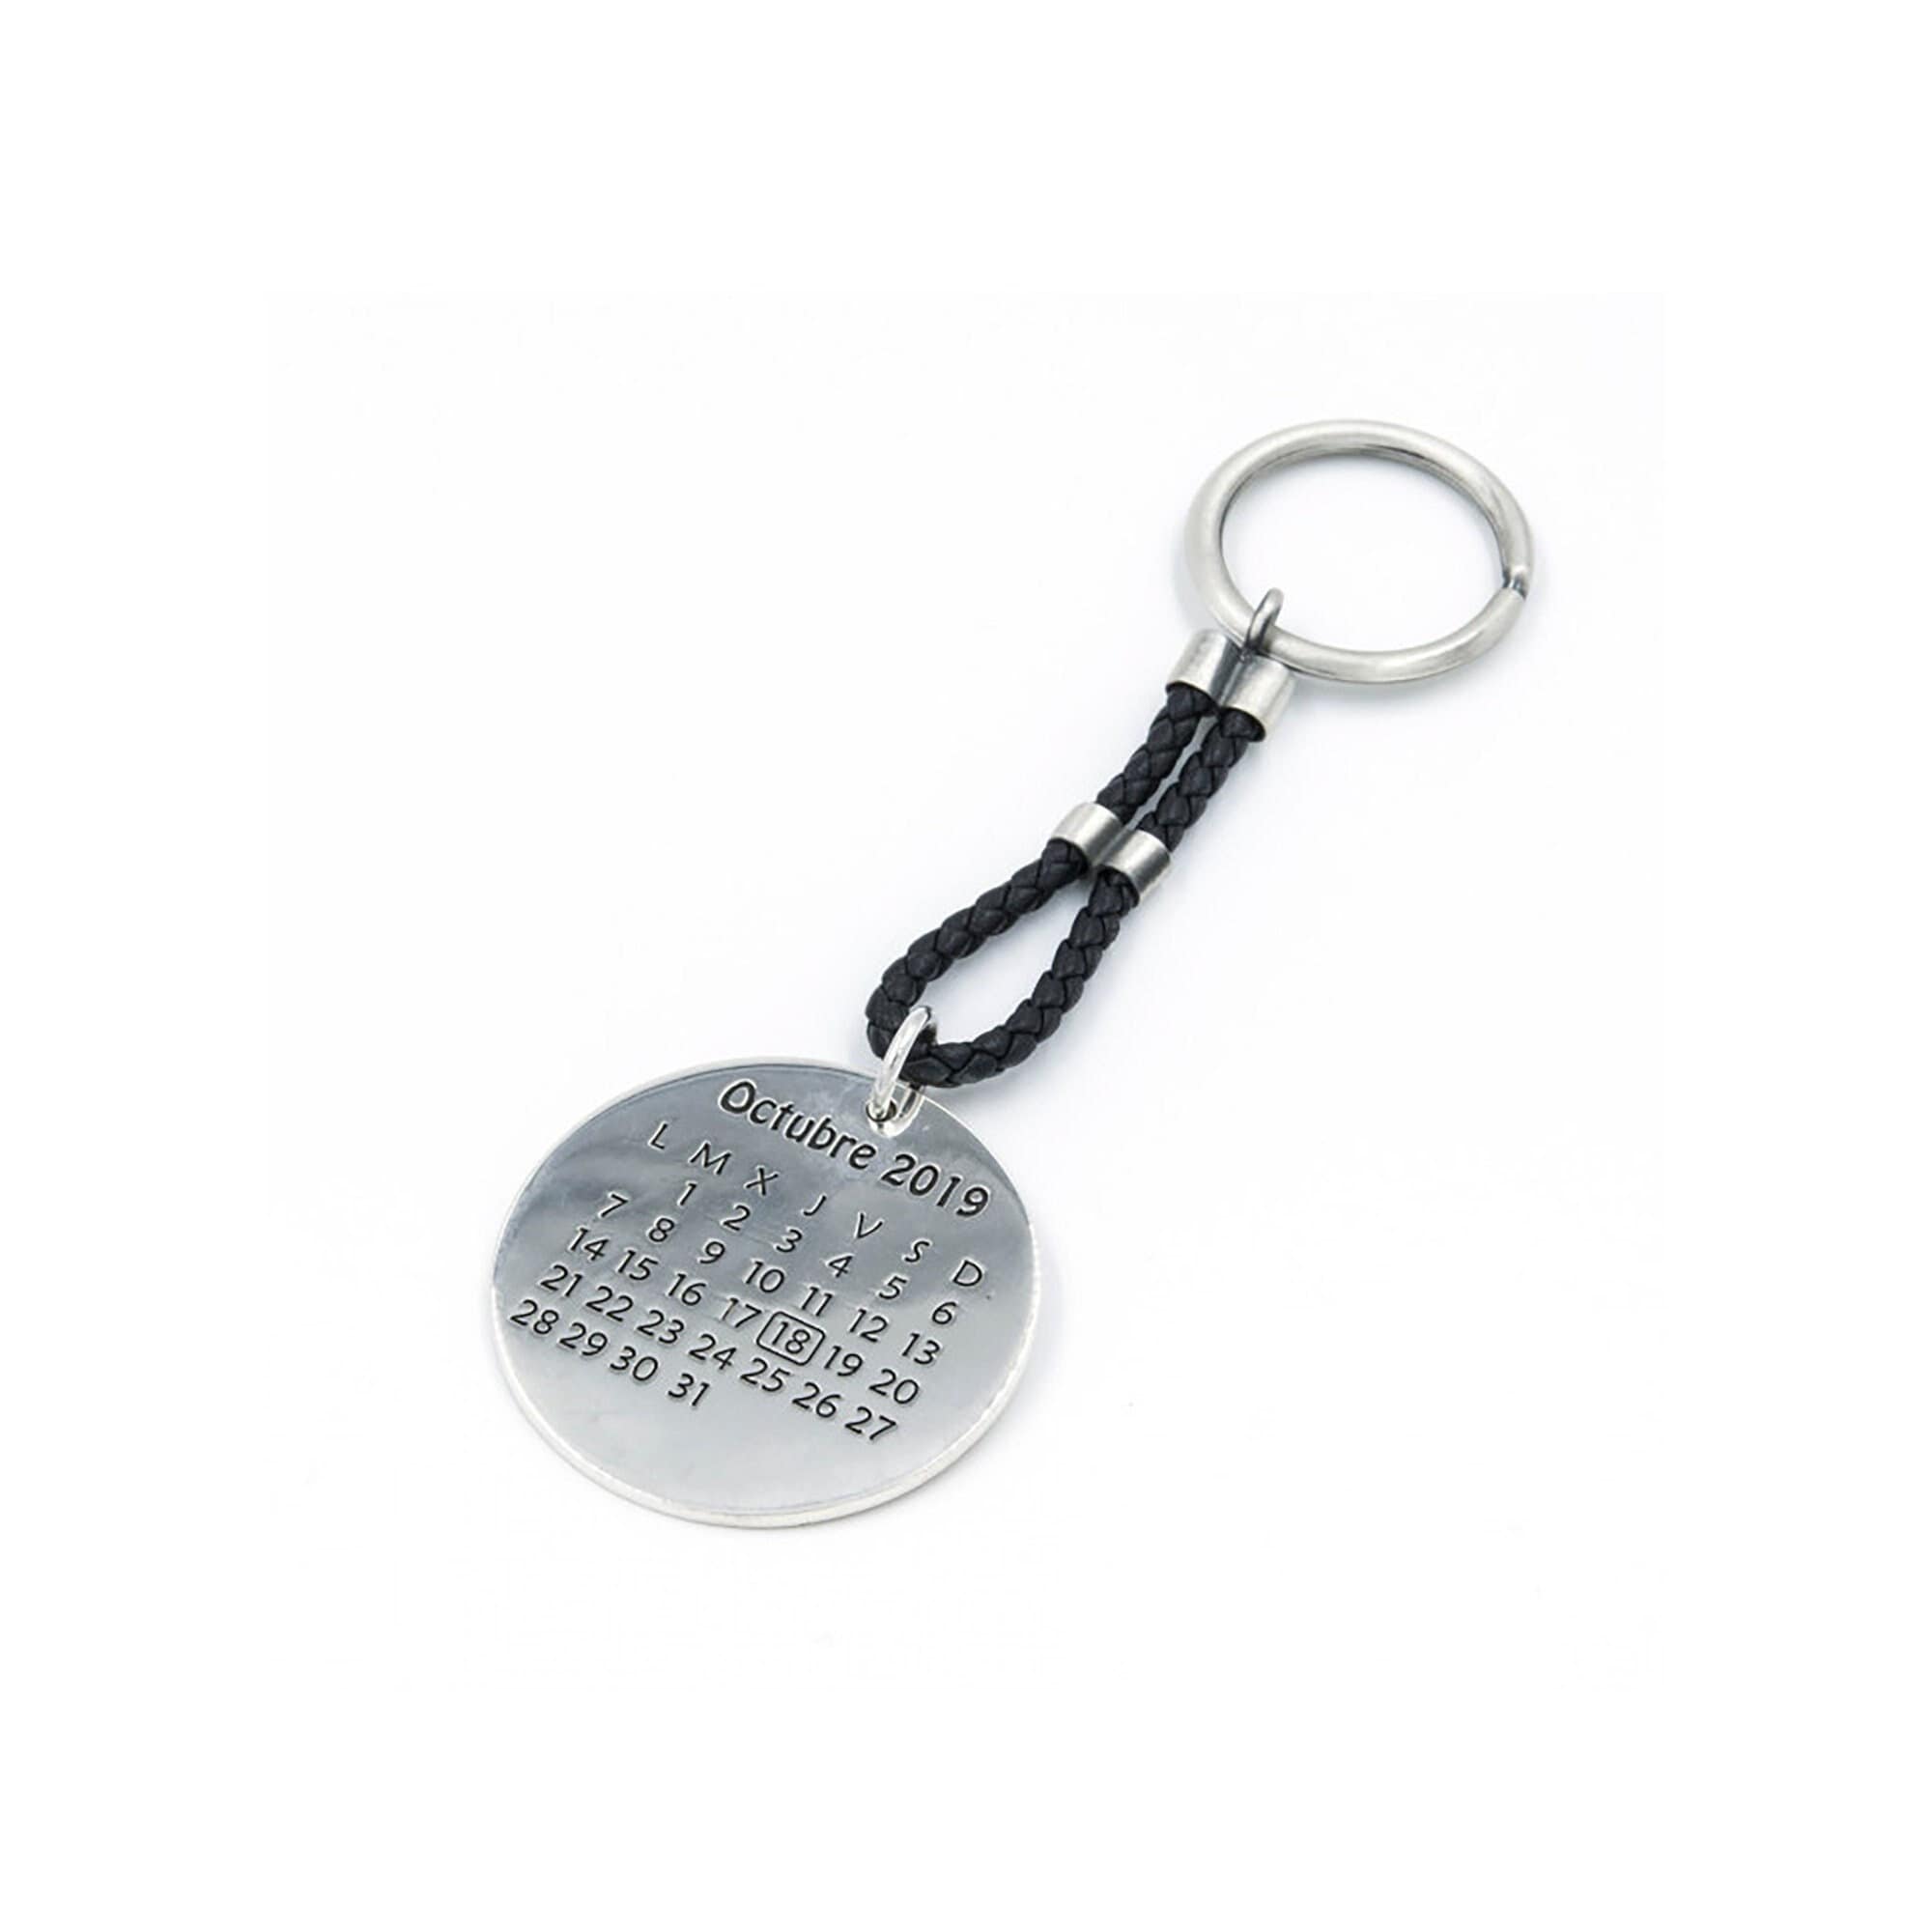 10 Stainless Steel Key Ring 25 Mm 